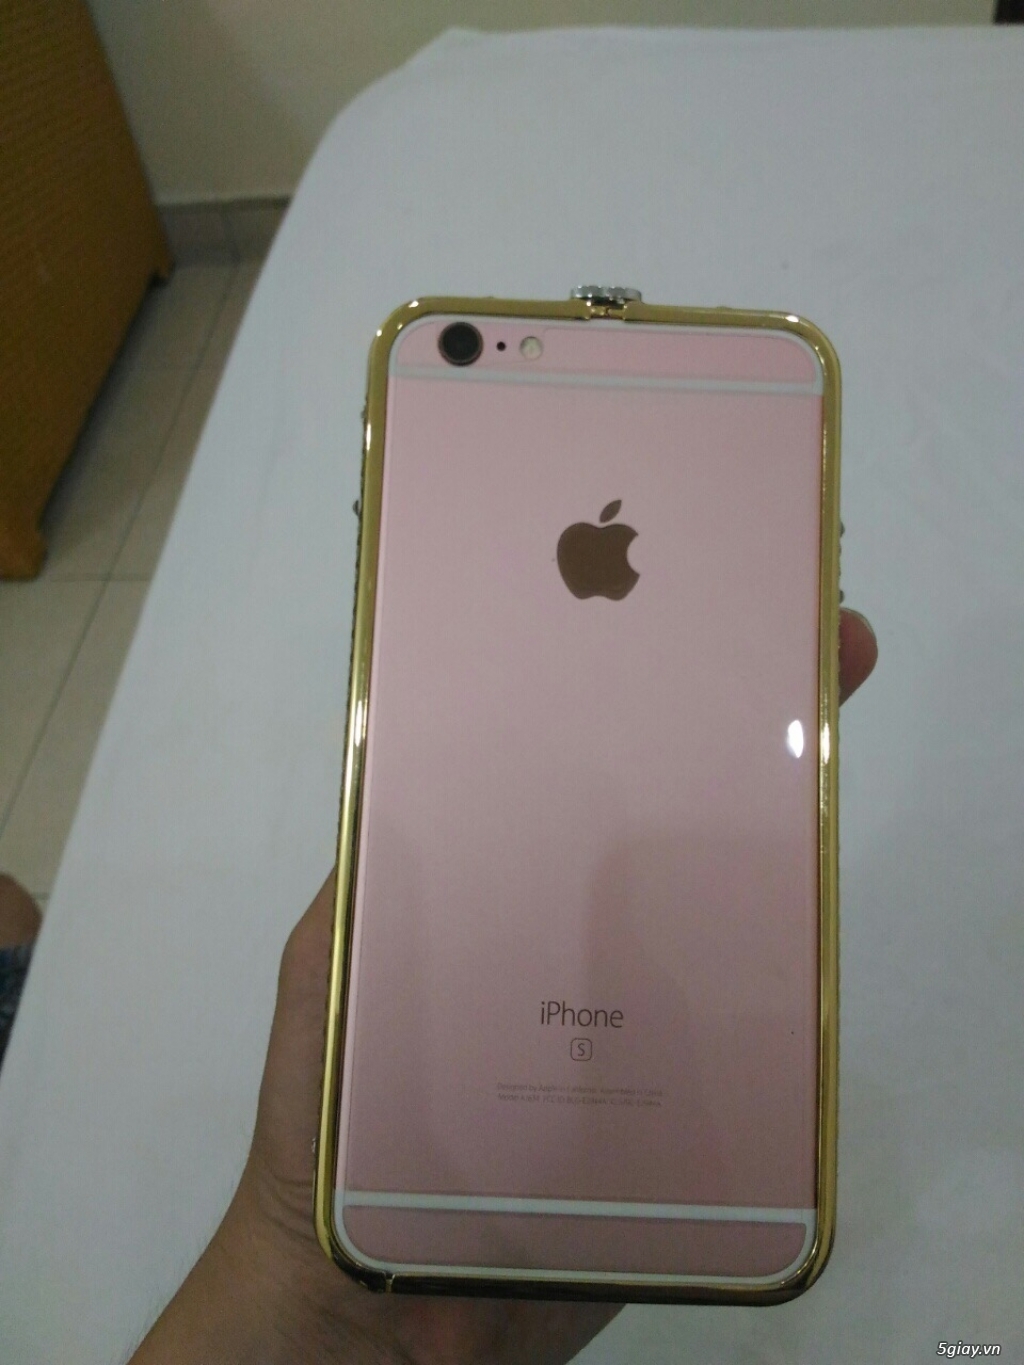 Iphone 6s Plus 128gb rosa gold like new - 3